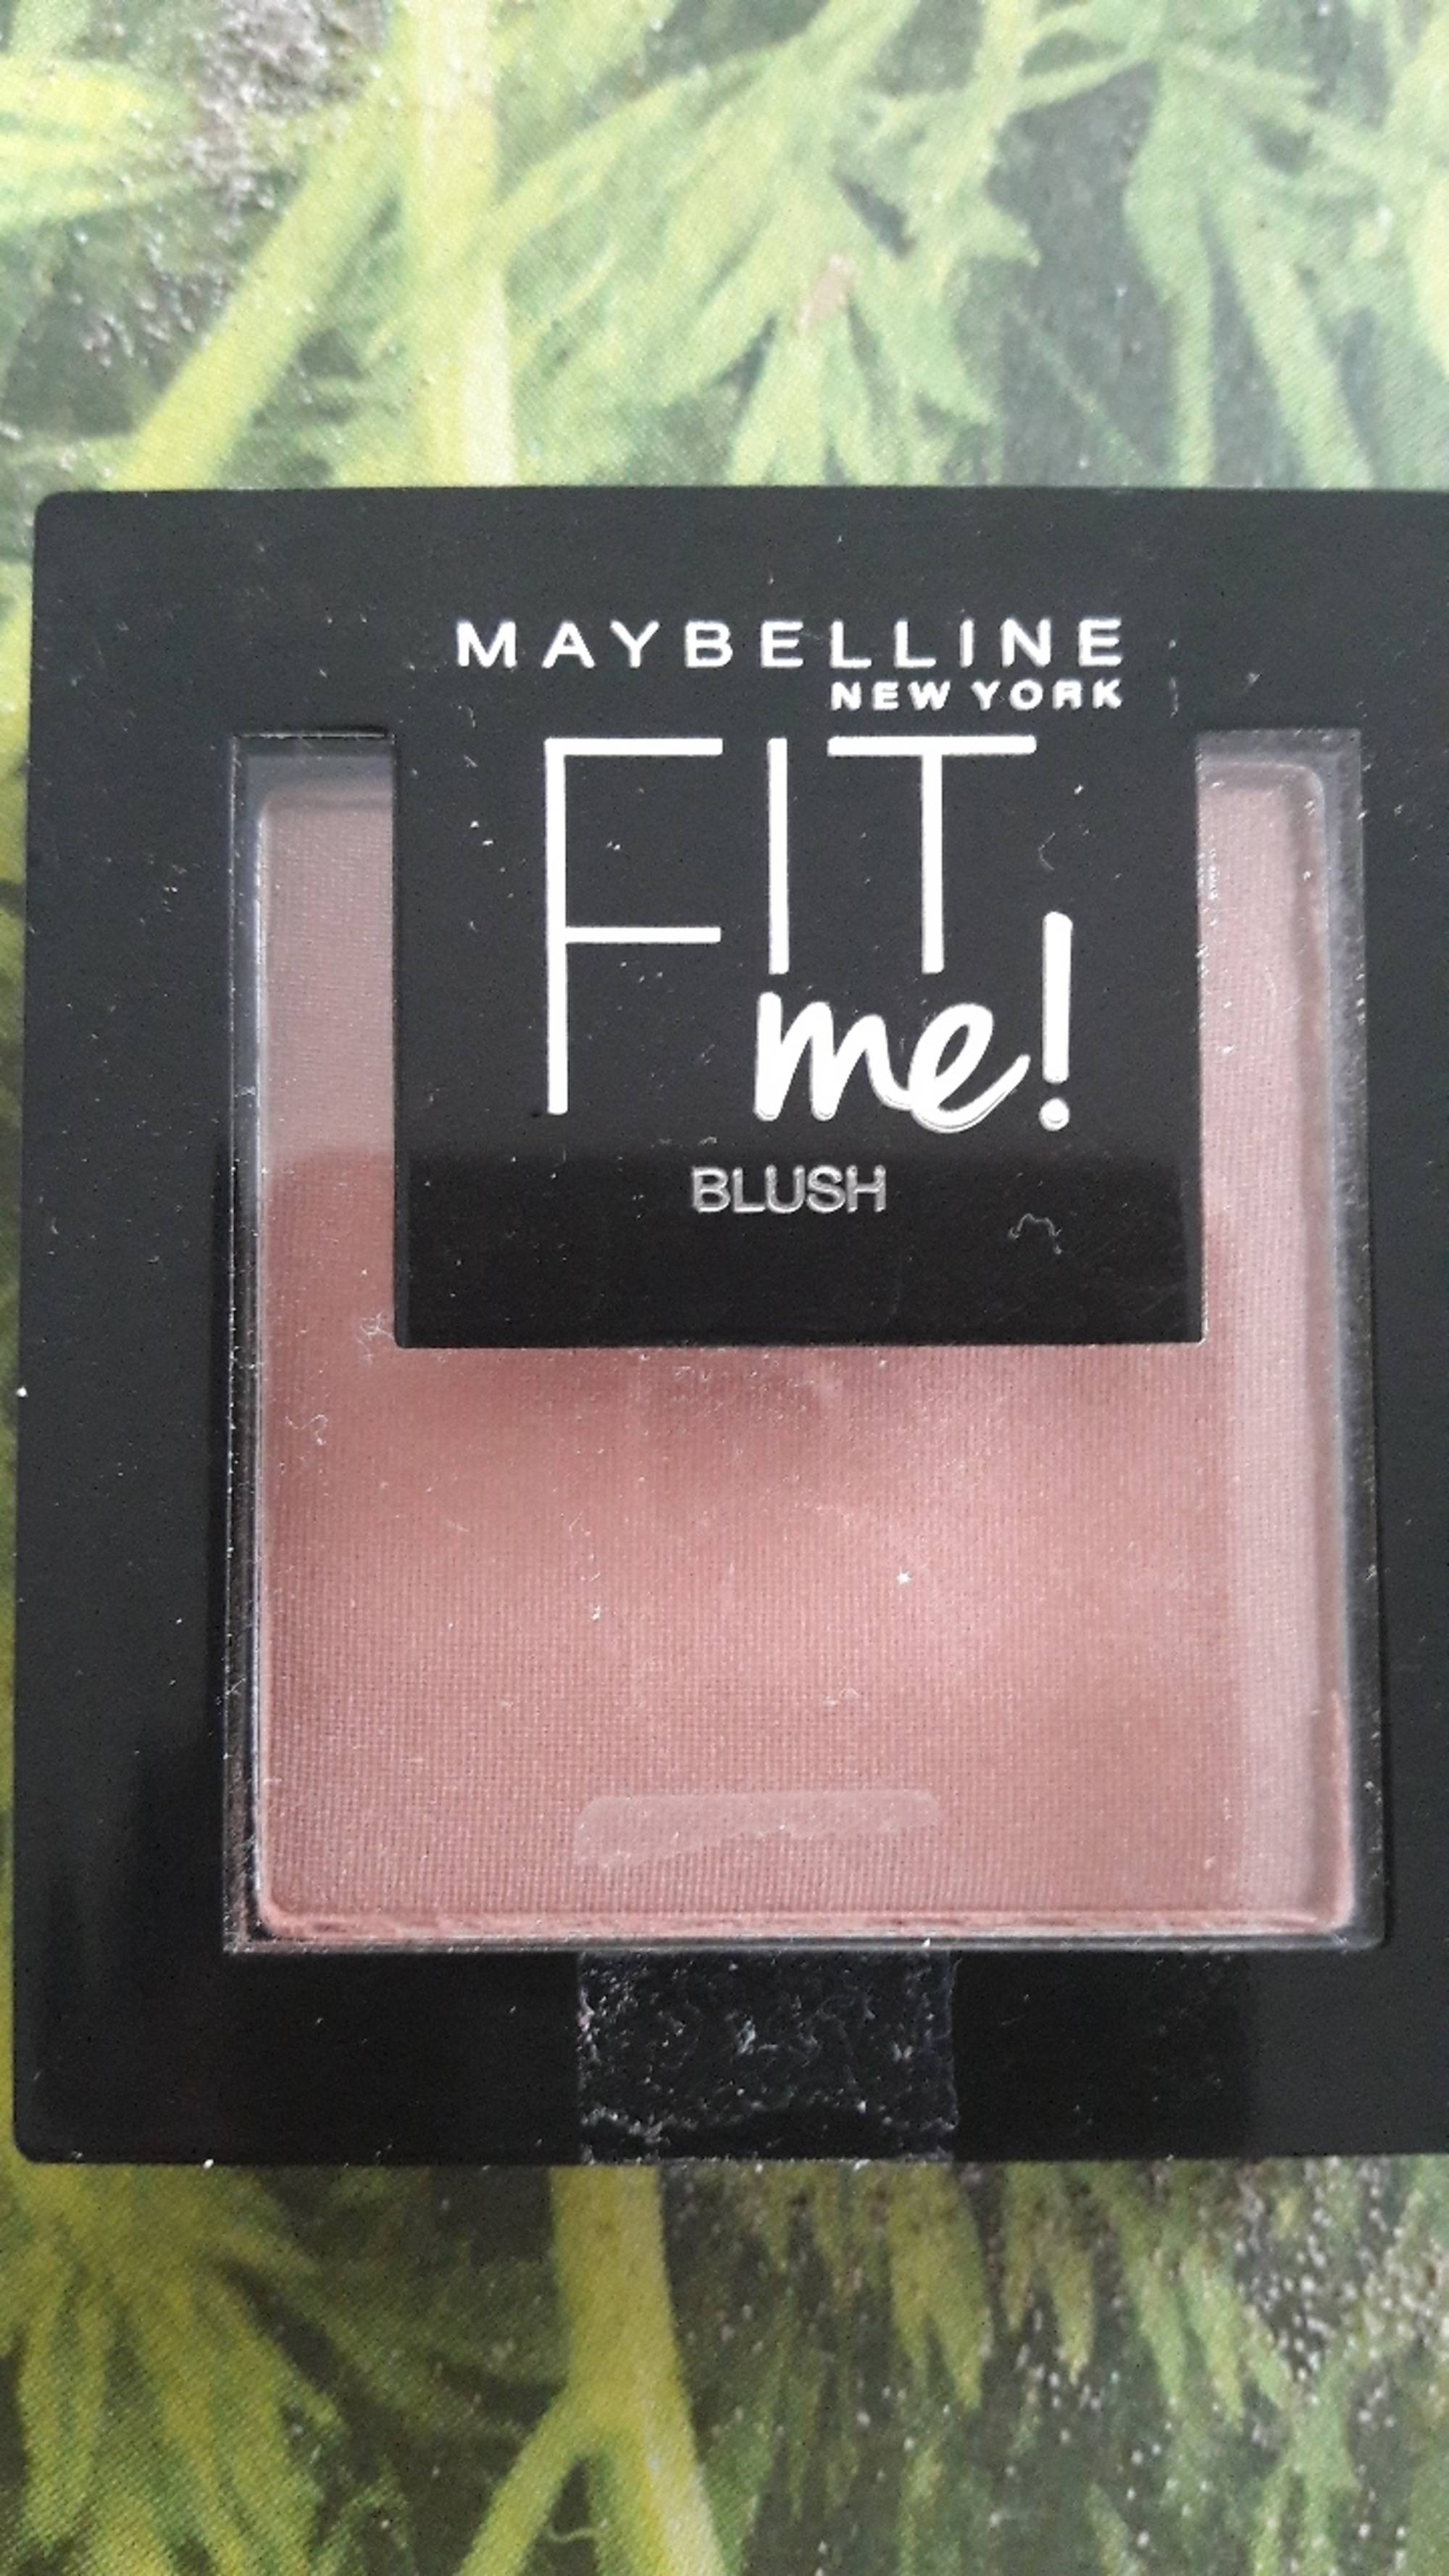 MAYBELLINE NEW YORK - Fit me ! - Blush